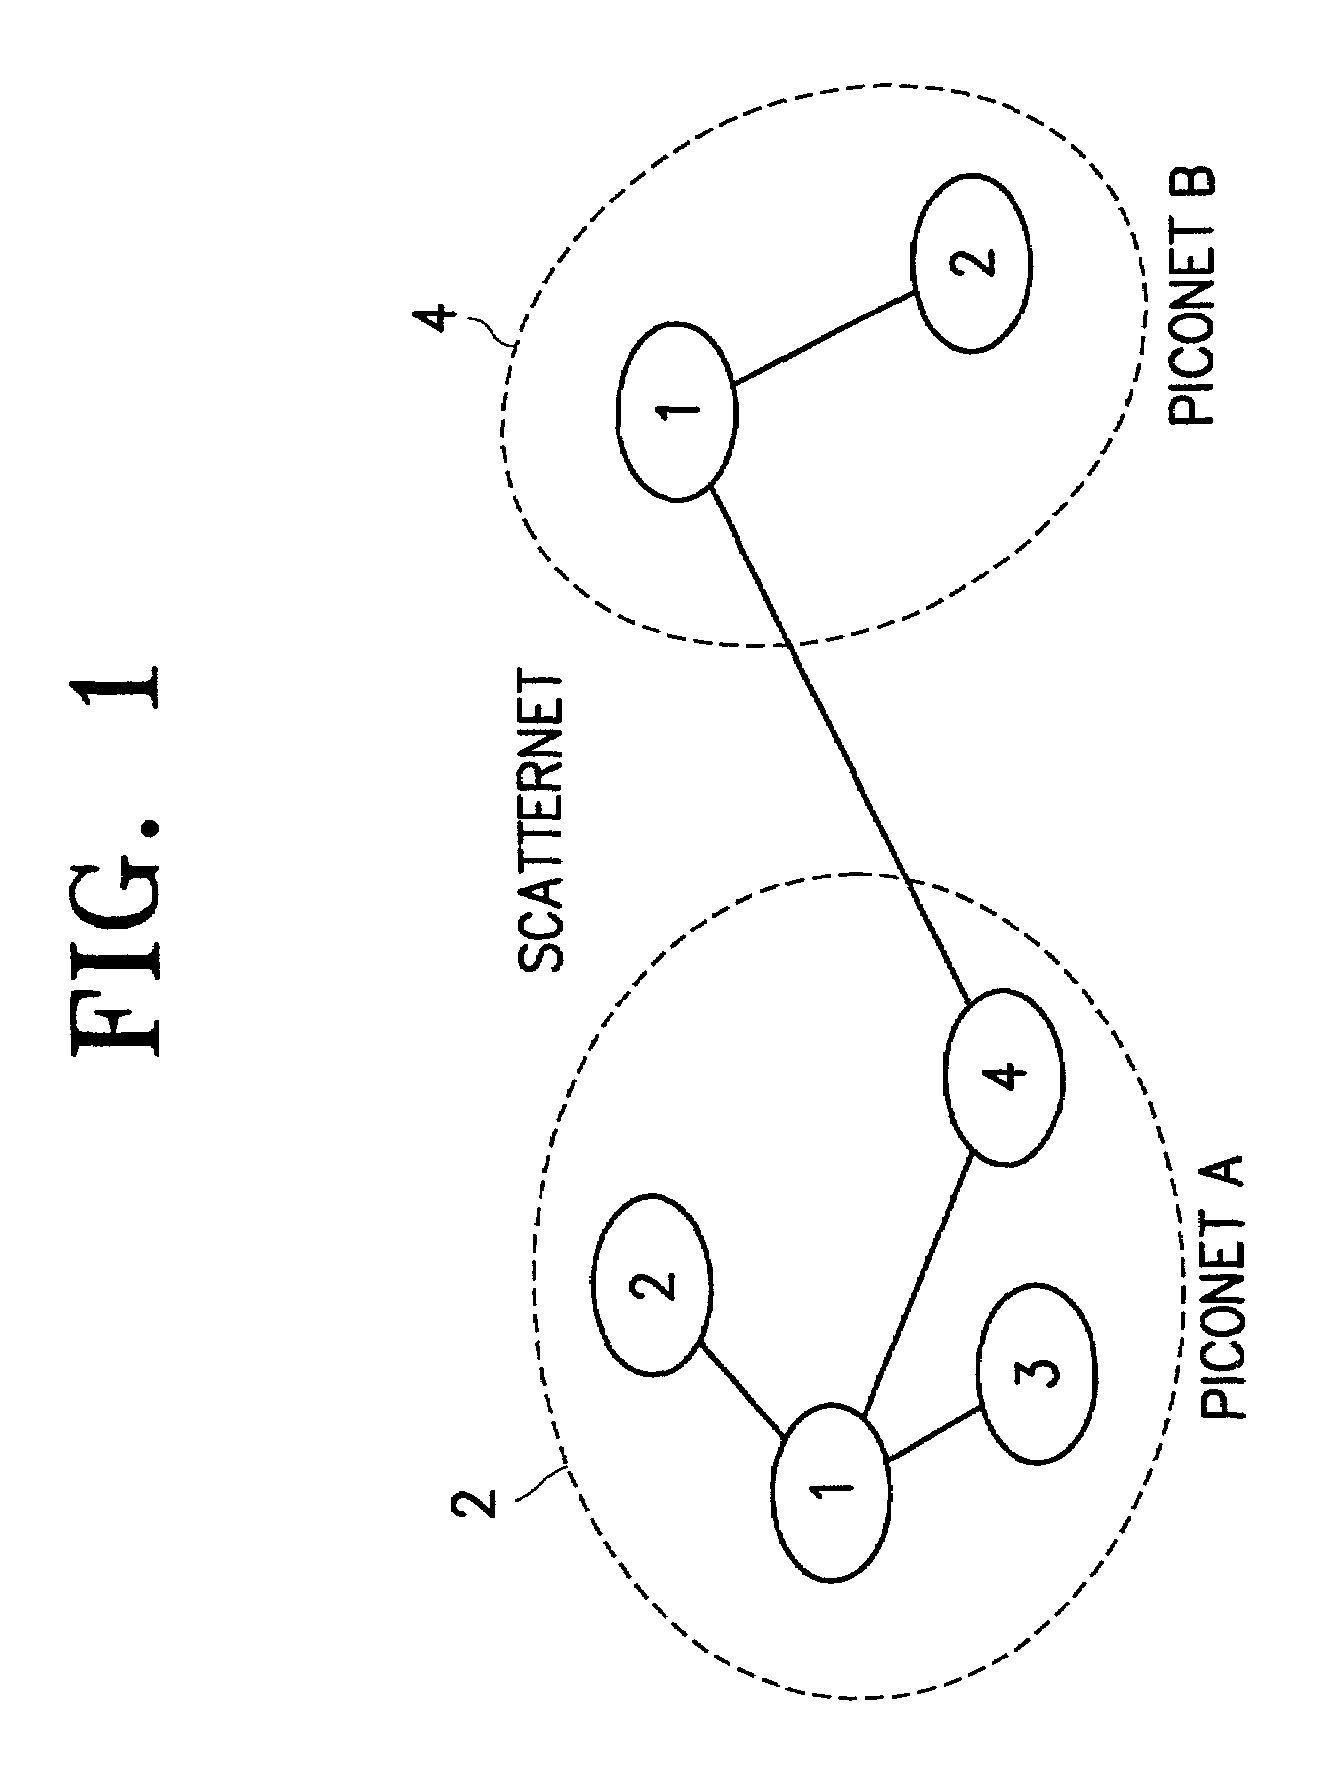 Method of information sharing between cellular and local wireless communication systems